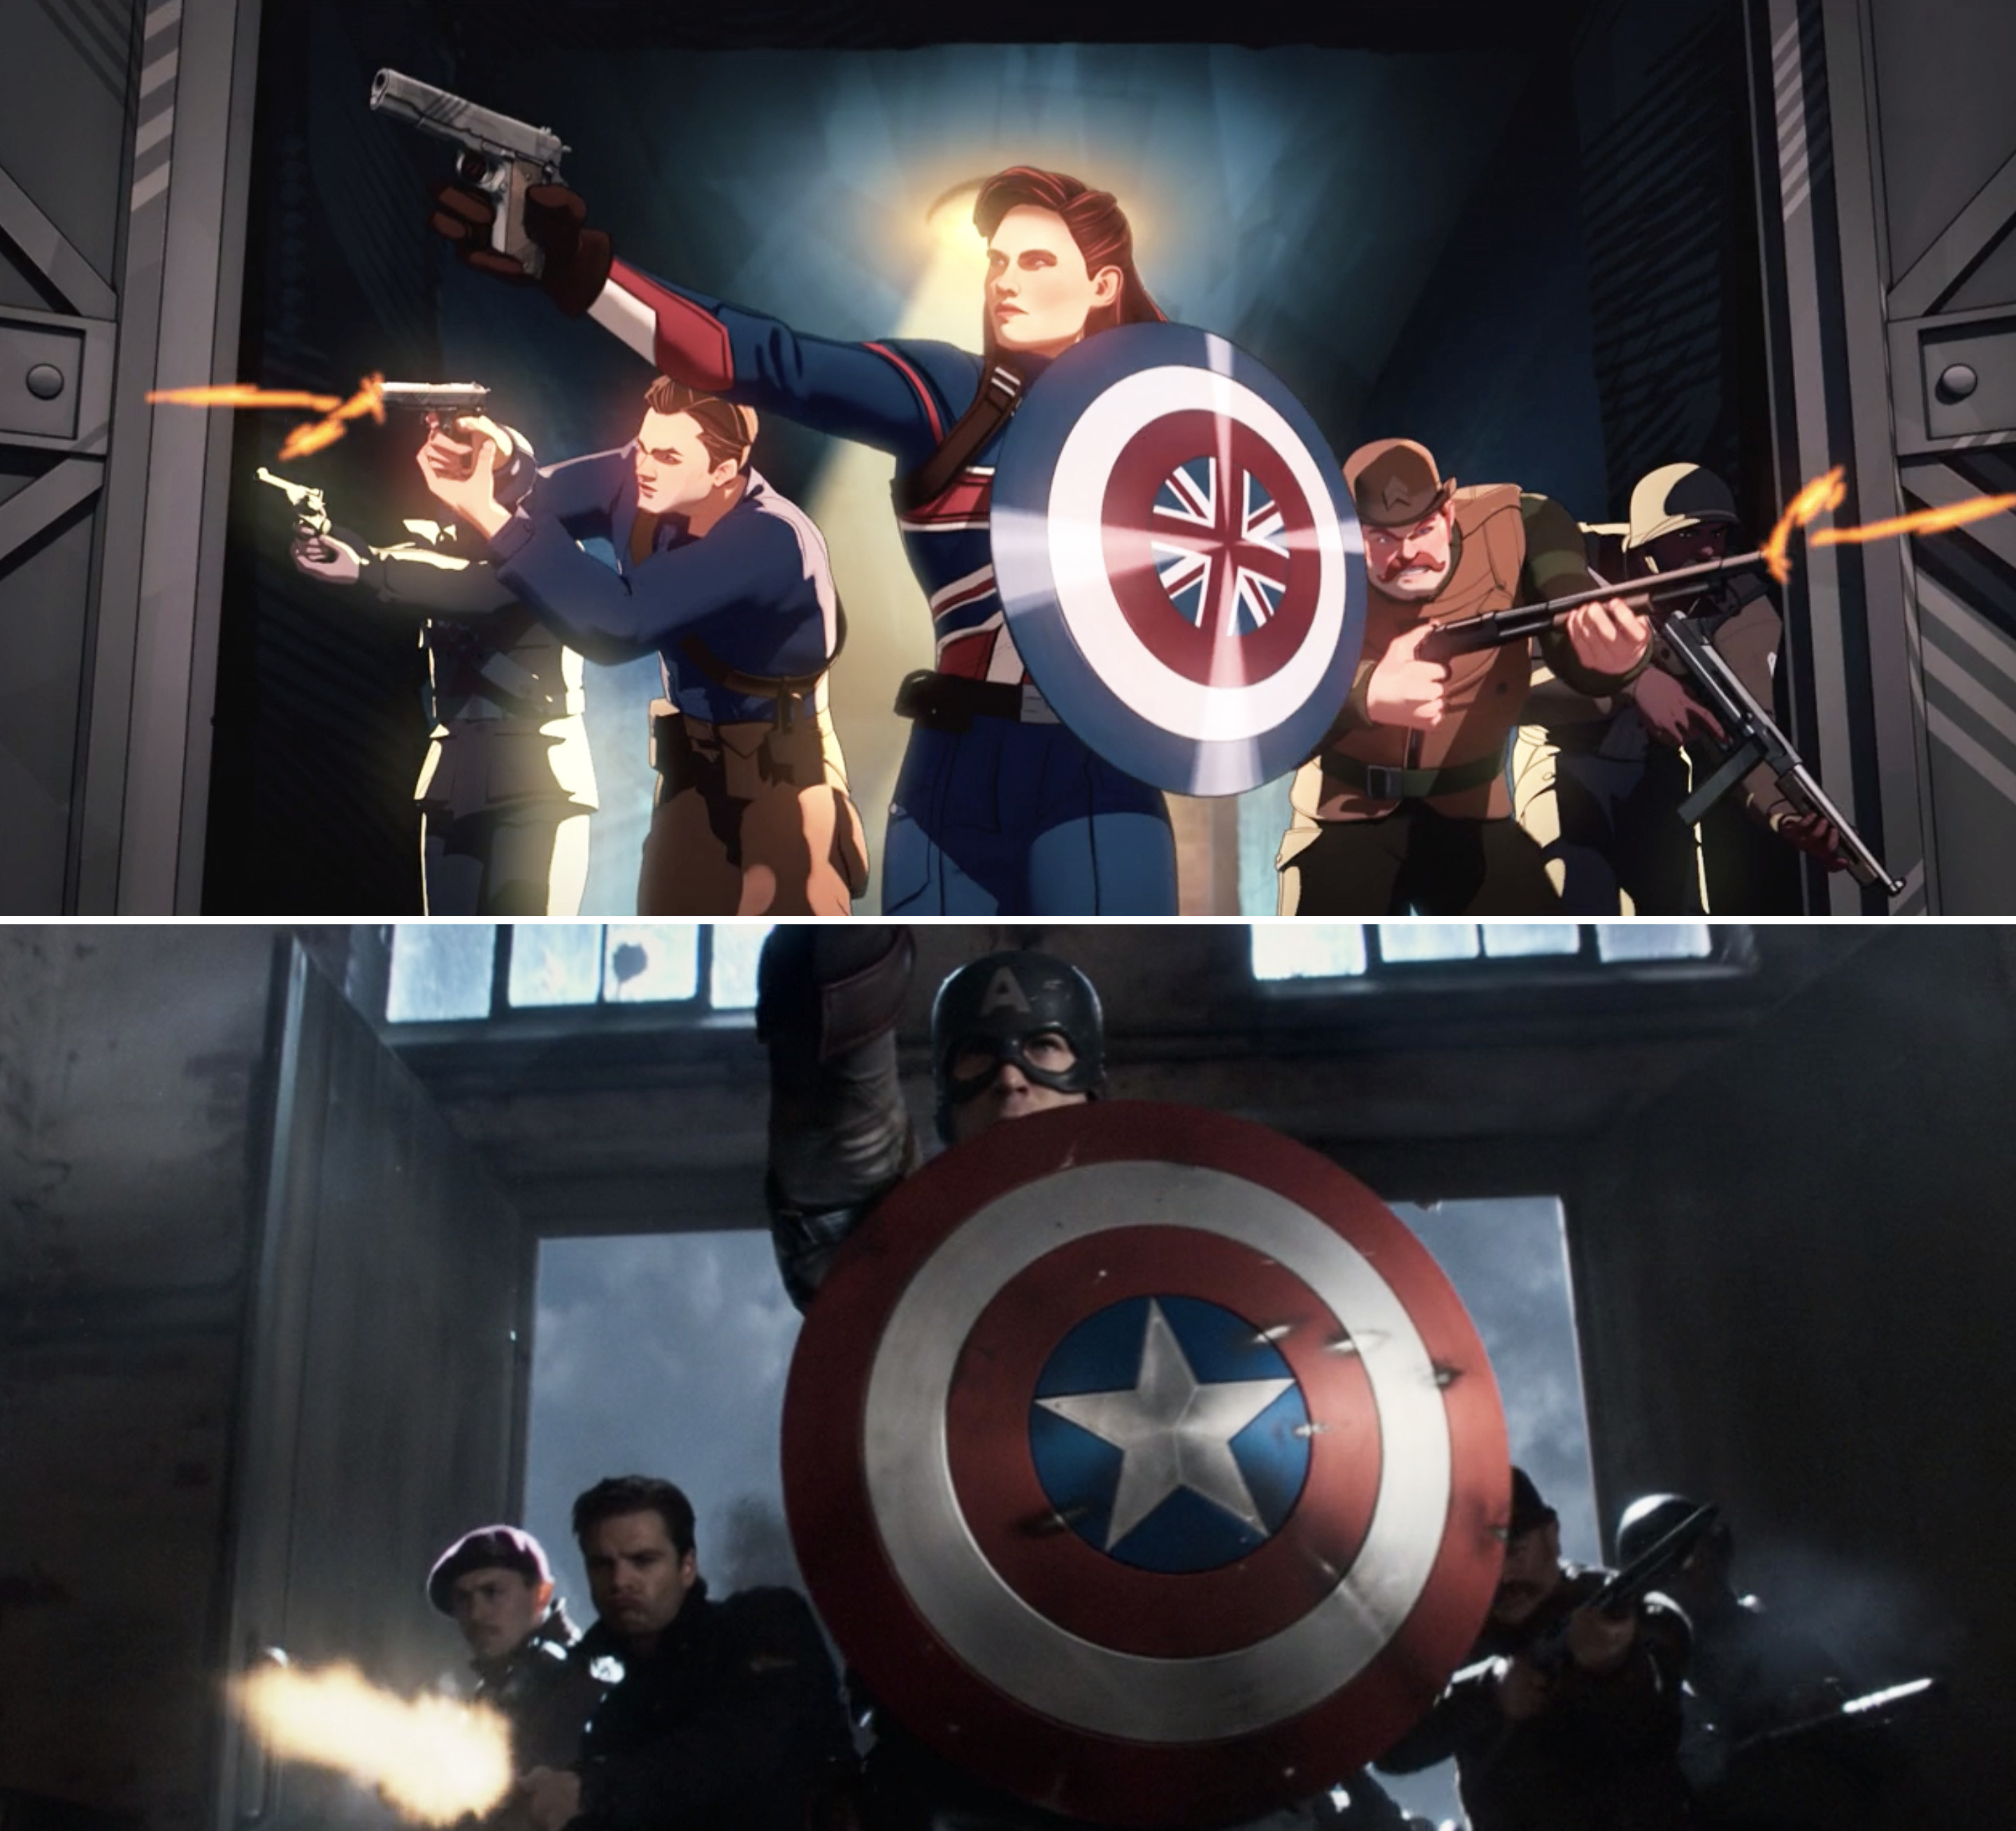 Peggy and the Howling Commandos vs. Steve and the Howling Commandos